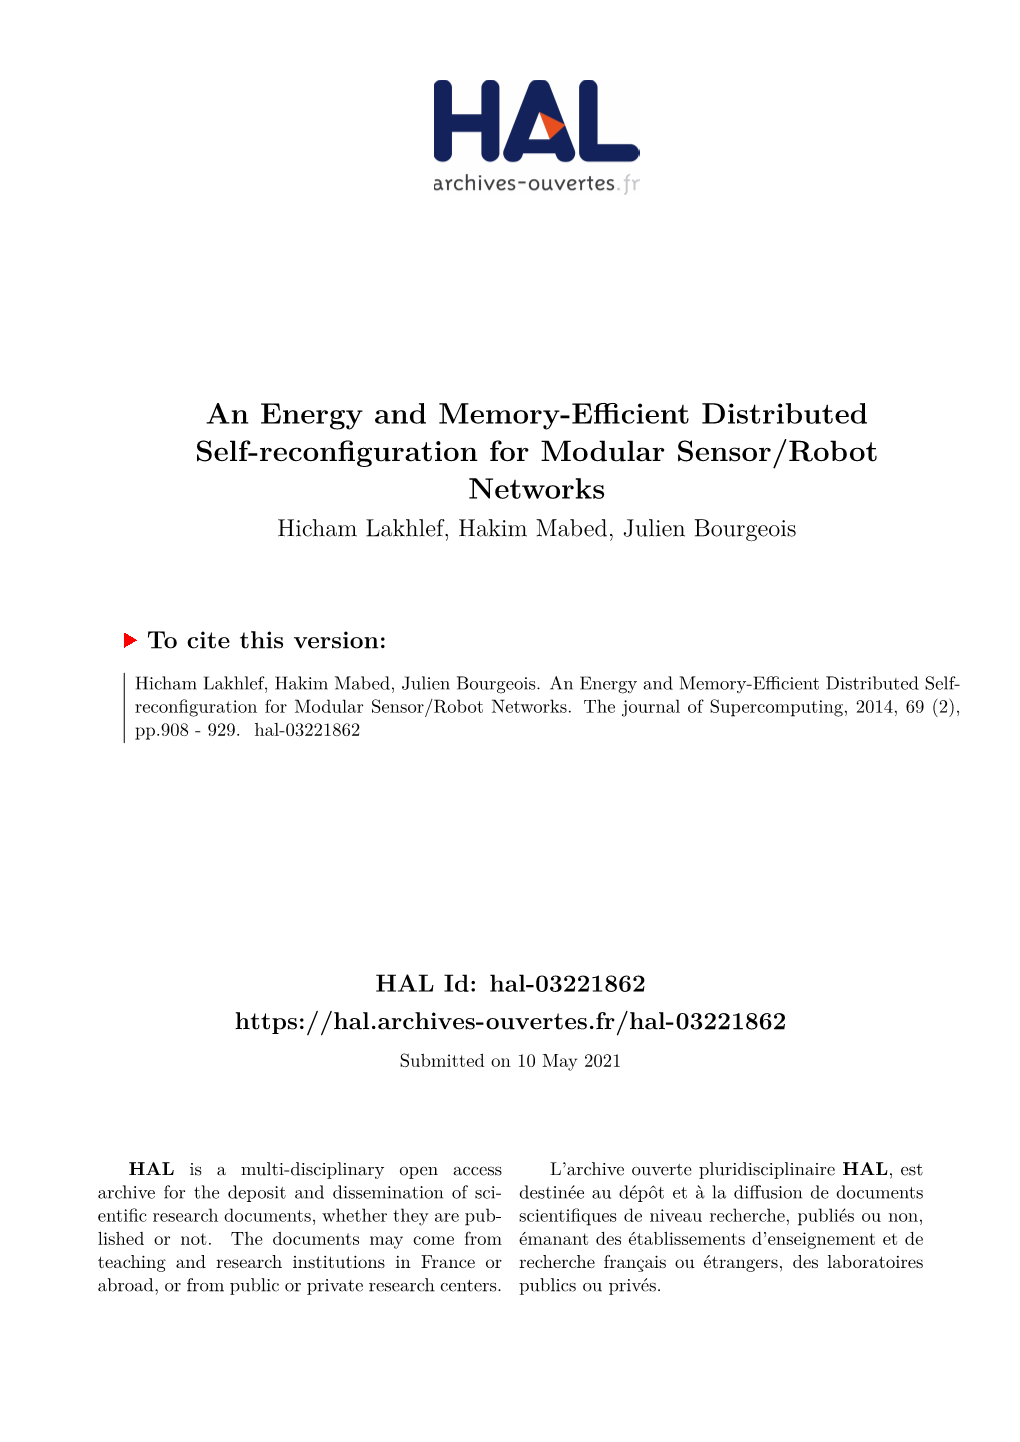 An Energy and Memory-Efficient Distributed Self-Reconfiguration For